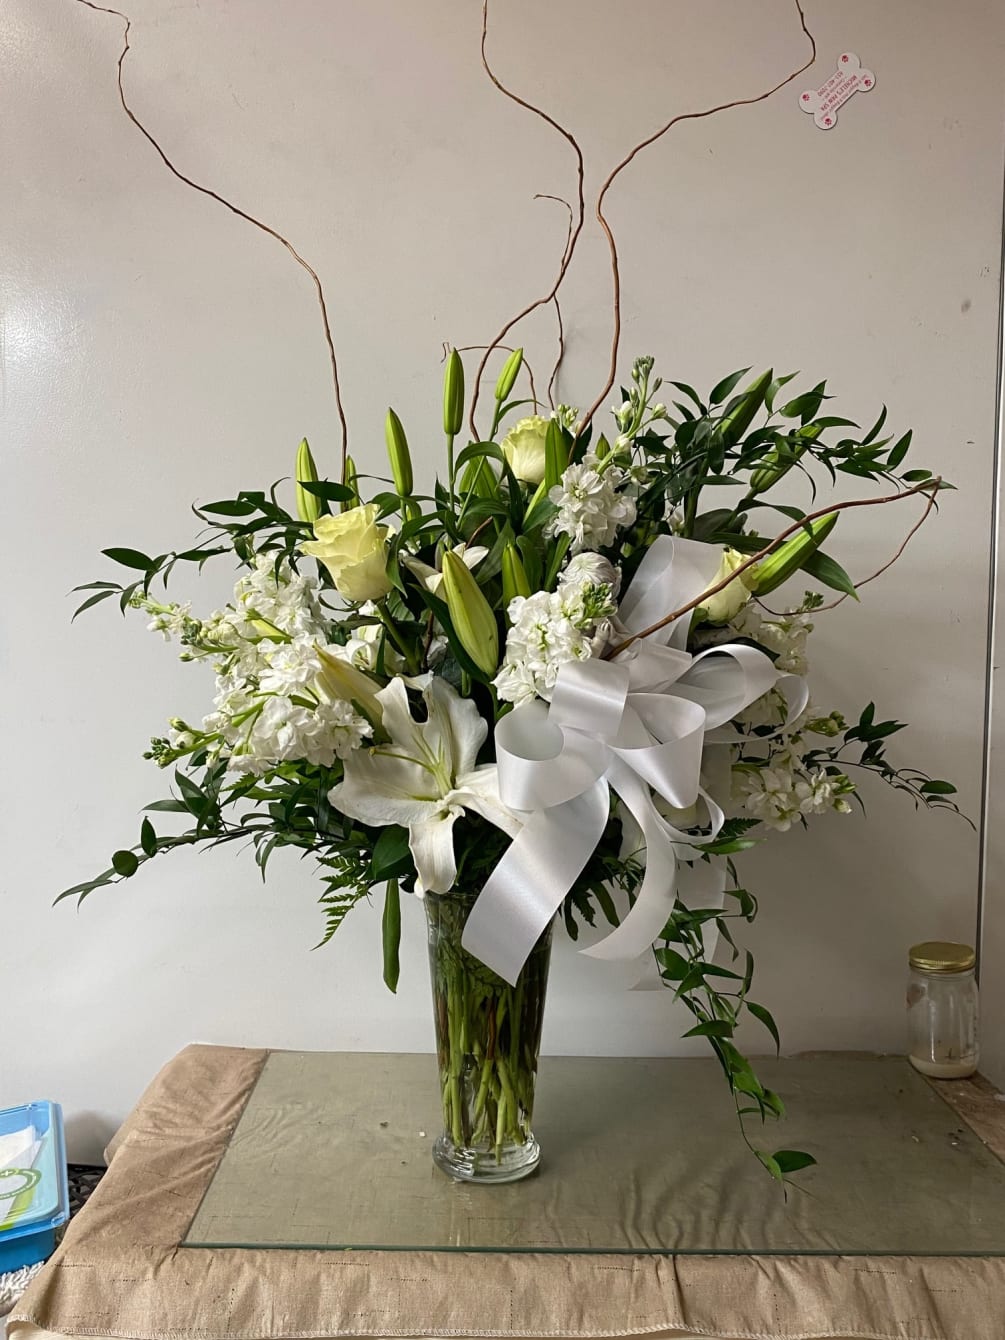 White roses, stock, snapdragons, curly willow and lilies with mixed greens. 